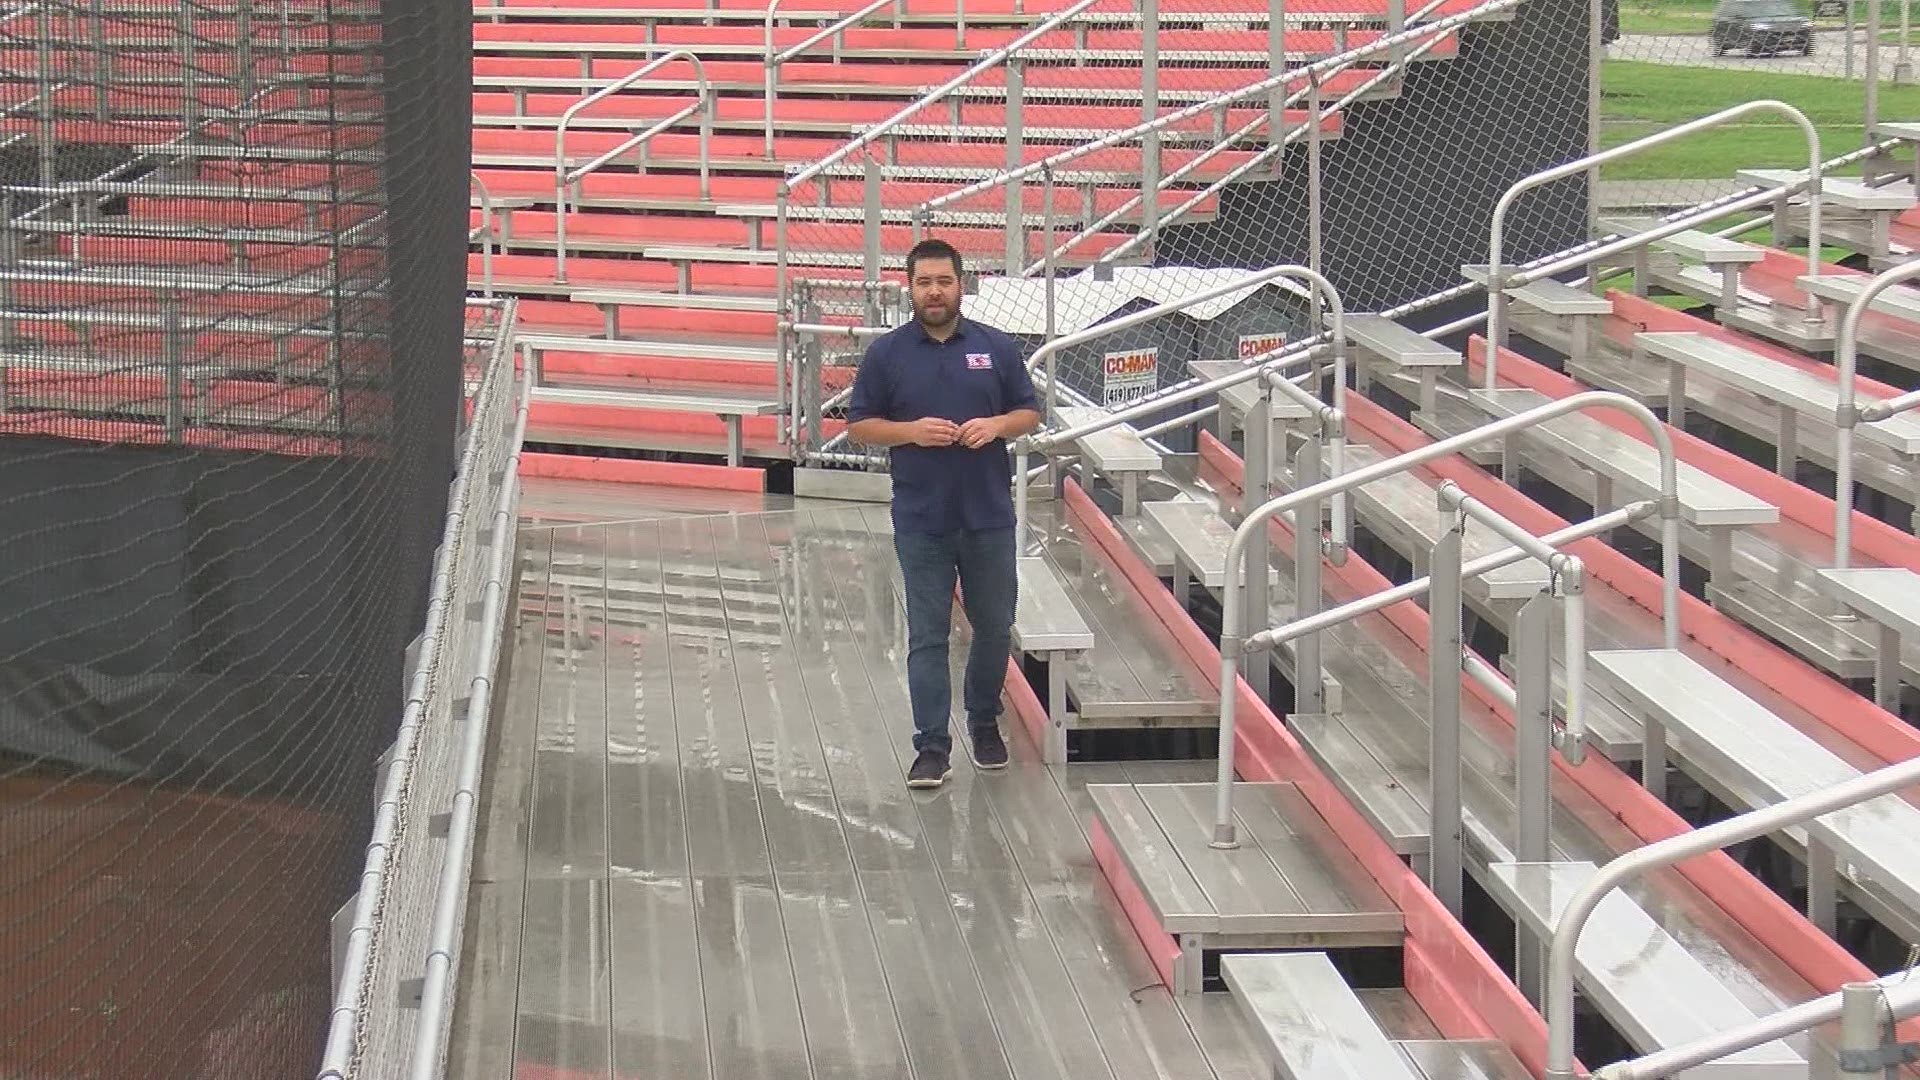 The stands at Gary Haas stadium will remain empty for the foreseeable future. For the man whose name is on the stadium, the decision has left him frustrated.